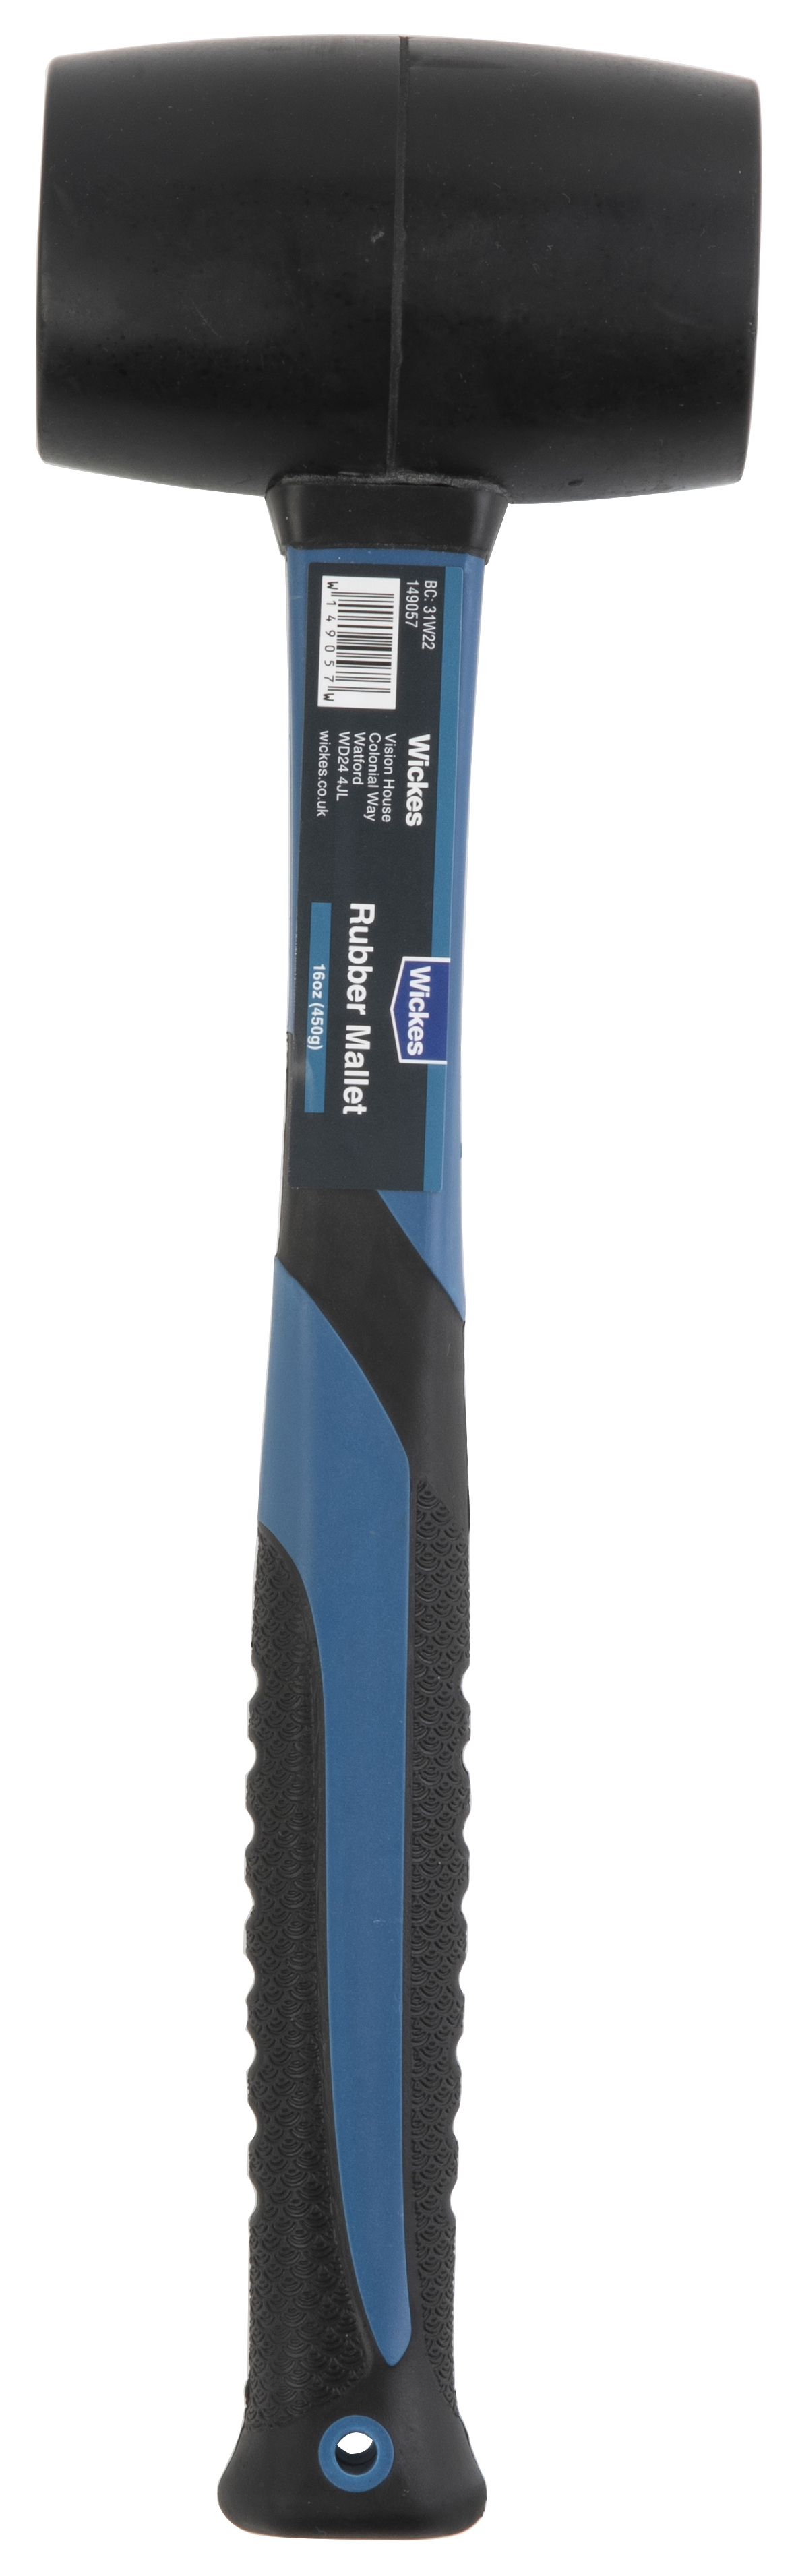 Image of Wickes General Purpose Rubber Mallet - 16oz